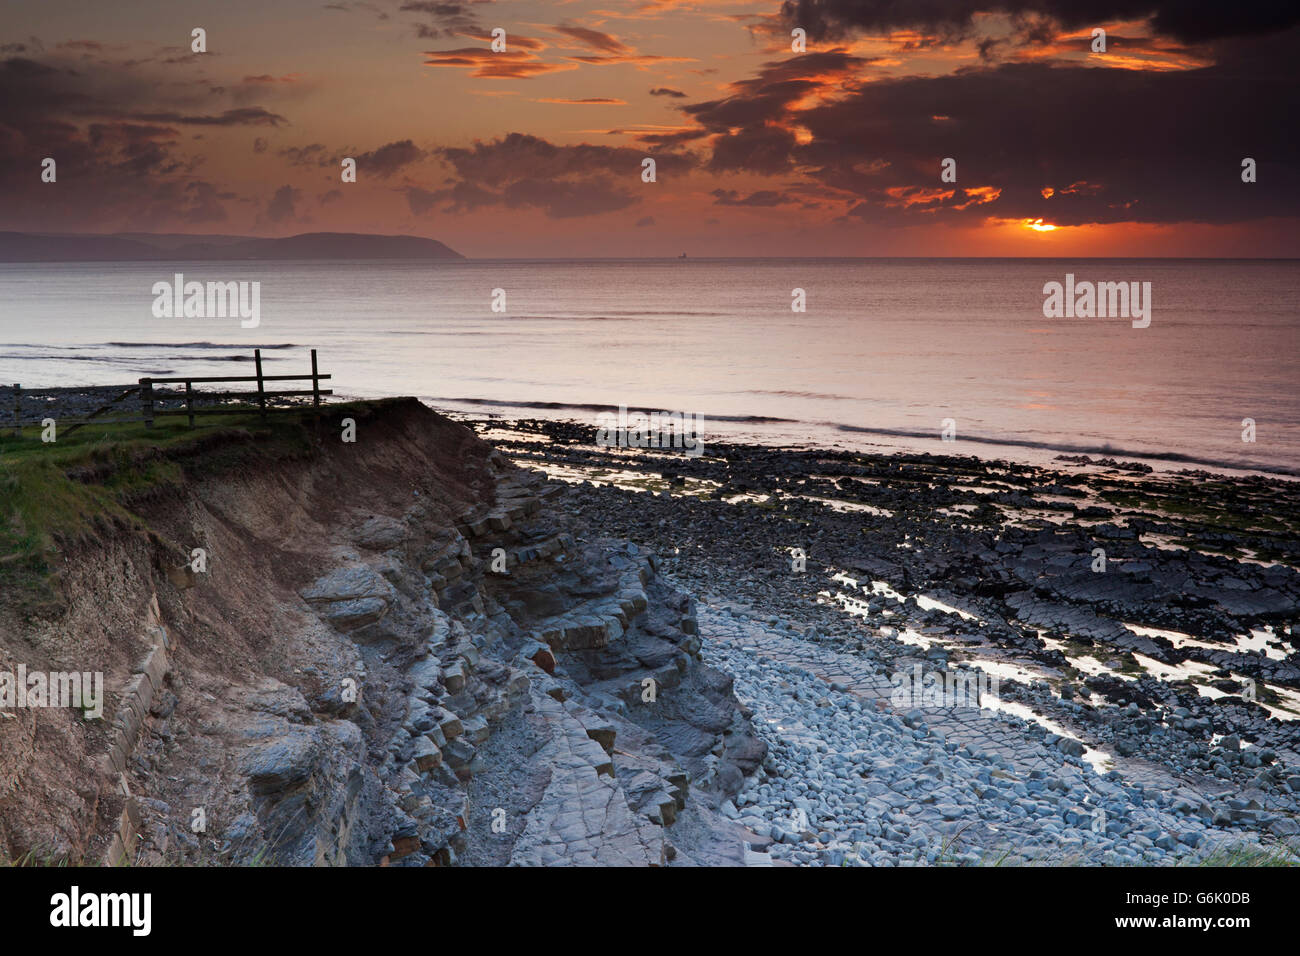 Sunset on a cloudy and showery evening at Kilve Beach, from the cliffs looking out over the Bristol Channel, United Kingdom Stock Photo